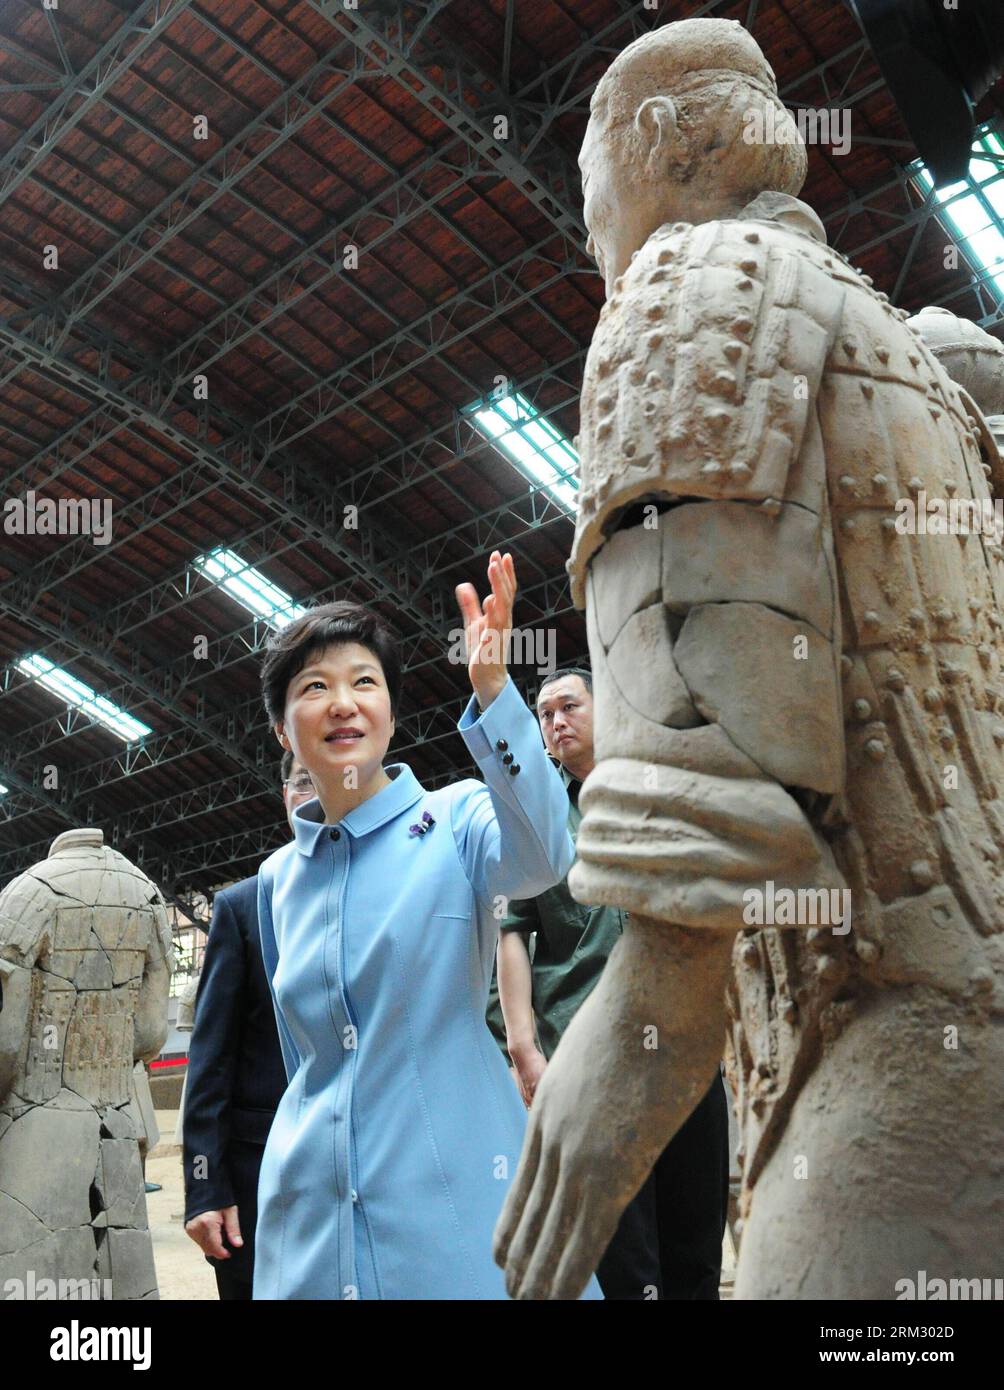 (130630) -- XI AN, June 30, 2013 (Xinhua) -- Republic of Korea (ROK) President Park Geun-hye visits the ancient terracotta army, buried for centuries to guard the tomb of China s first emperor Qinshihuang of the Qin Dynasty (221 BC-207 BC), in Xi an, capital city of northwest China s Shaanxi Province, on June 30, 2013. (Xinhua/Ding Haitao) (ry) CHINA-XI AN-ROK PRESIDENT-ARRIVE (CN) PUBLICATIONxNOTxINxCHN   130630 Xi to June 30 2013 XINHUA Republic of Korea Rok President Park Geun Hye visits The Ancient Terra Cotta Army Buried for centuries to Guard The Tomb of China S First Emperor Qinshihuang Stock Photo